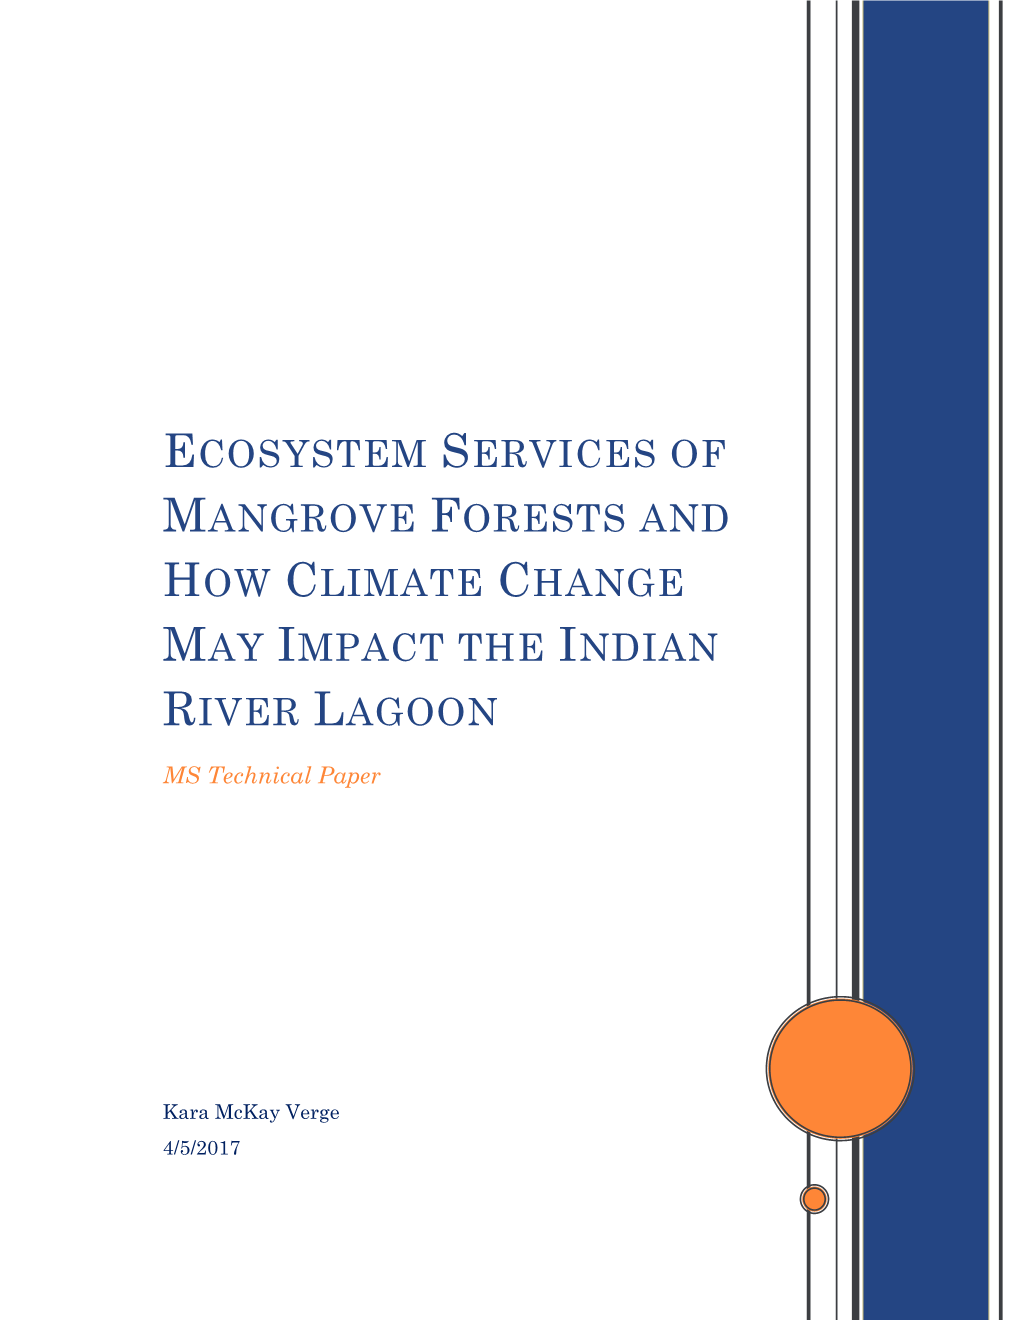 Ecosystem Services of Mangrove Forests and How Climate Change May Impact the Indian River Lagoon